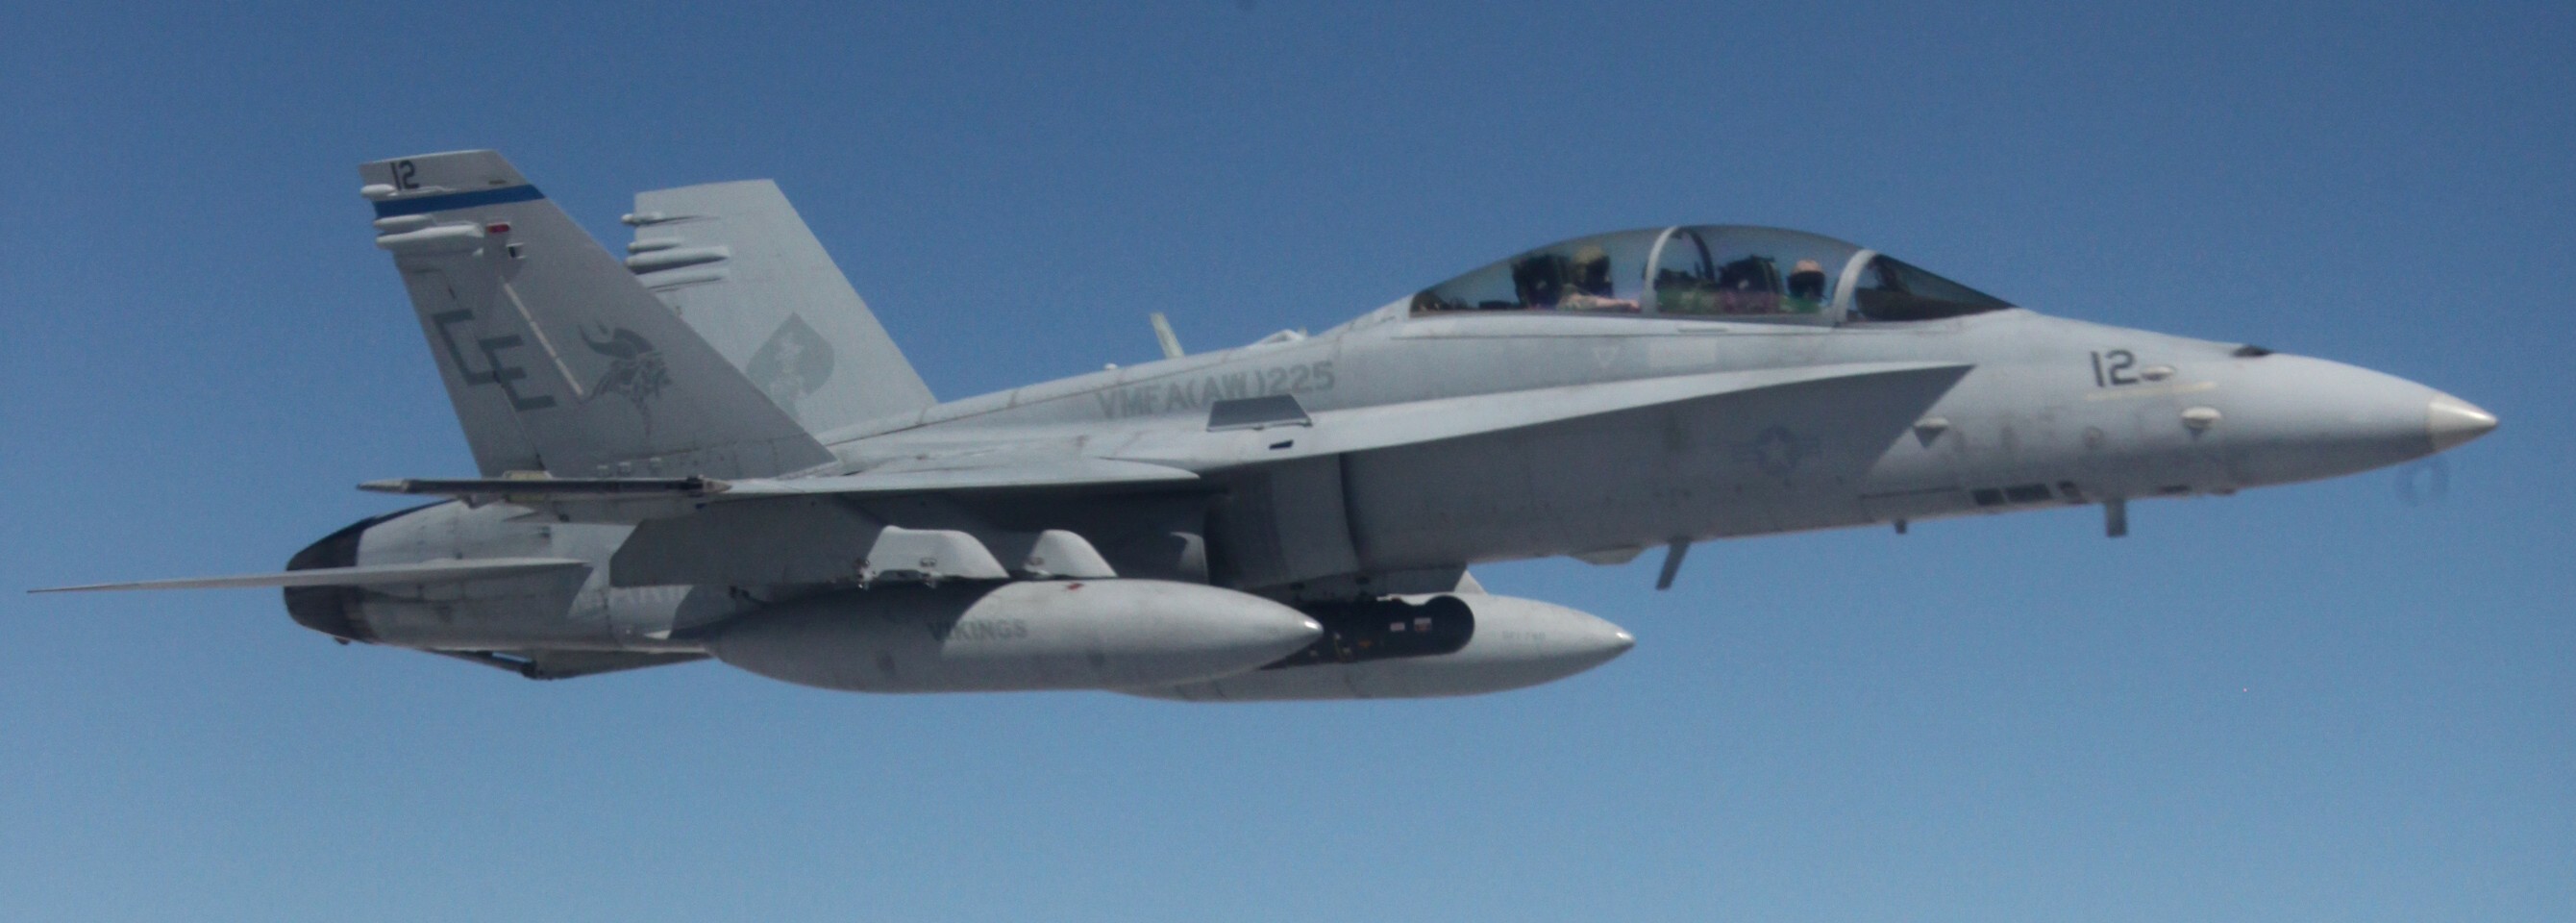 vmfa(aw)-225 vikings marine fighter attack squadron f/a-18d hornet 50